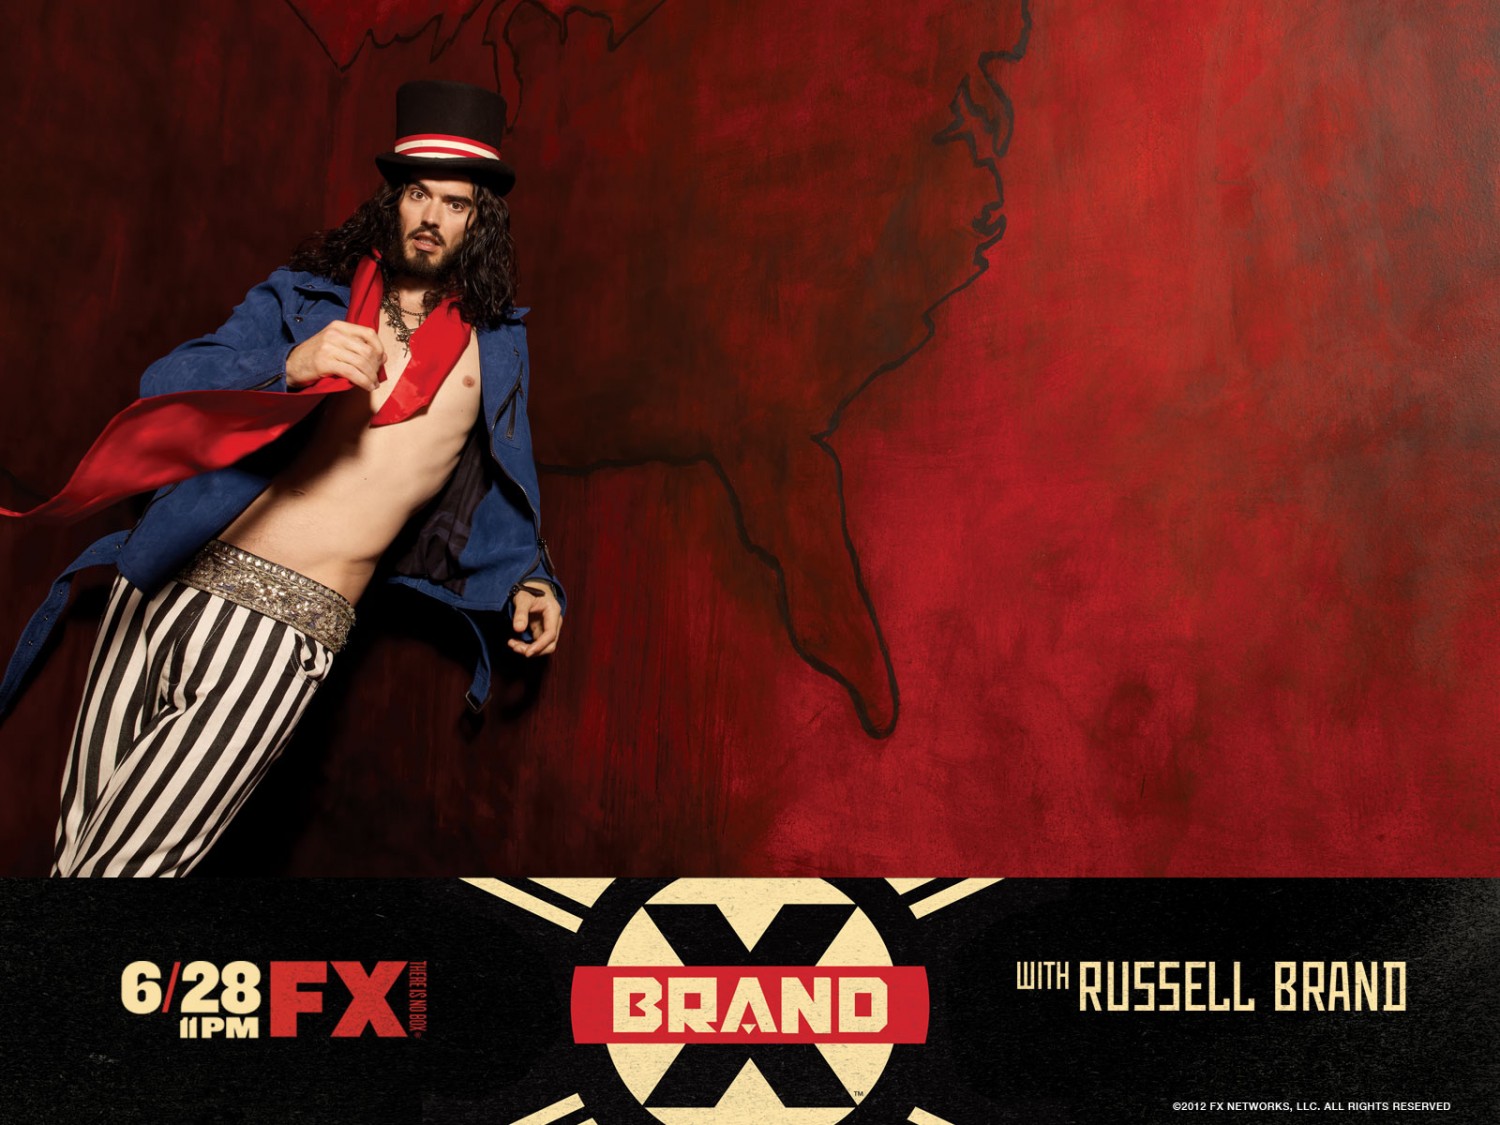 Extra Large TV Poster Image for Brand X with Russell Brand (#4 of 4)